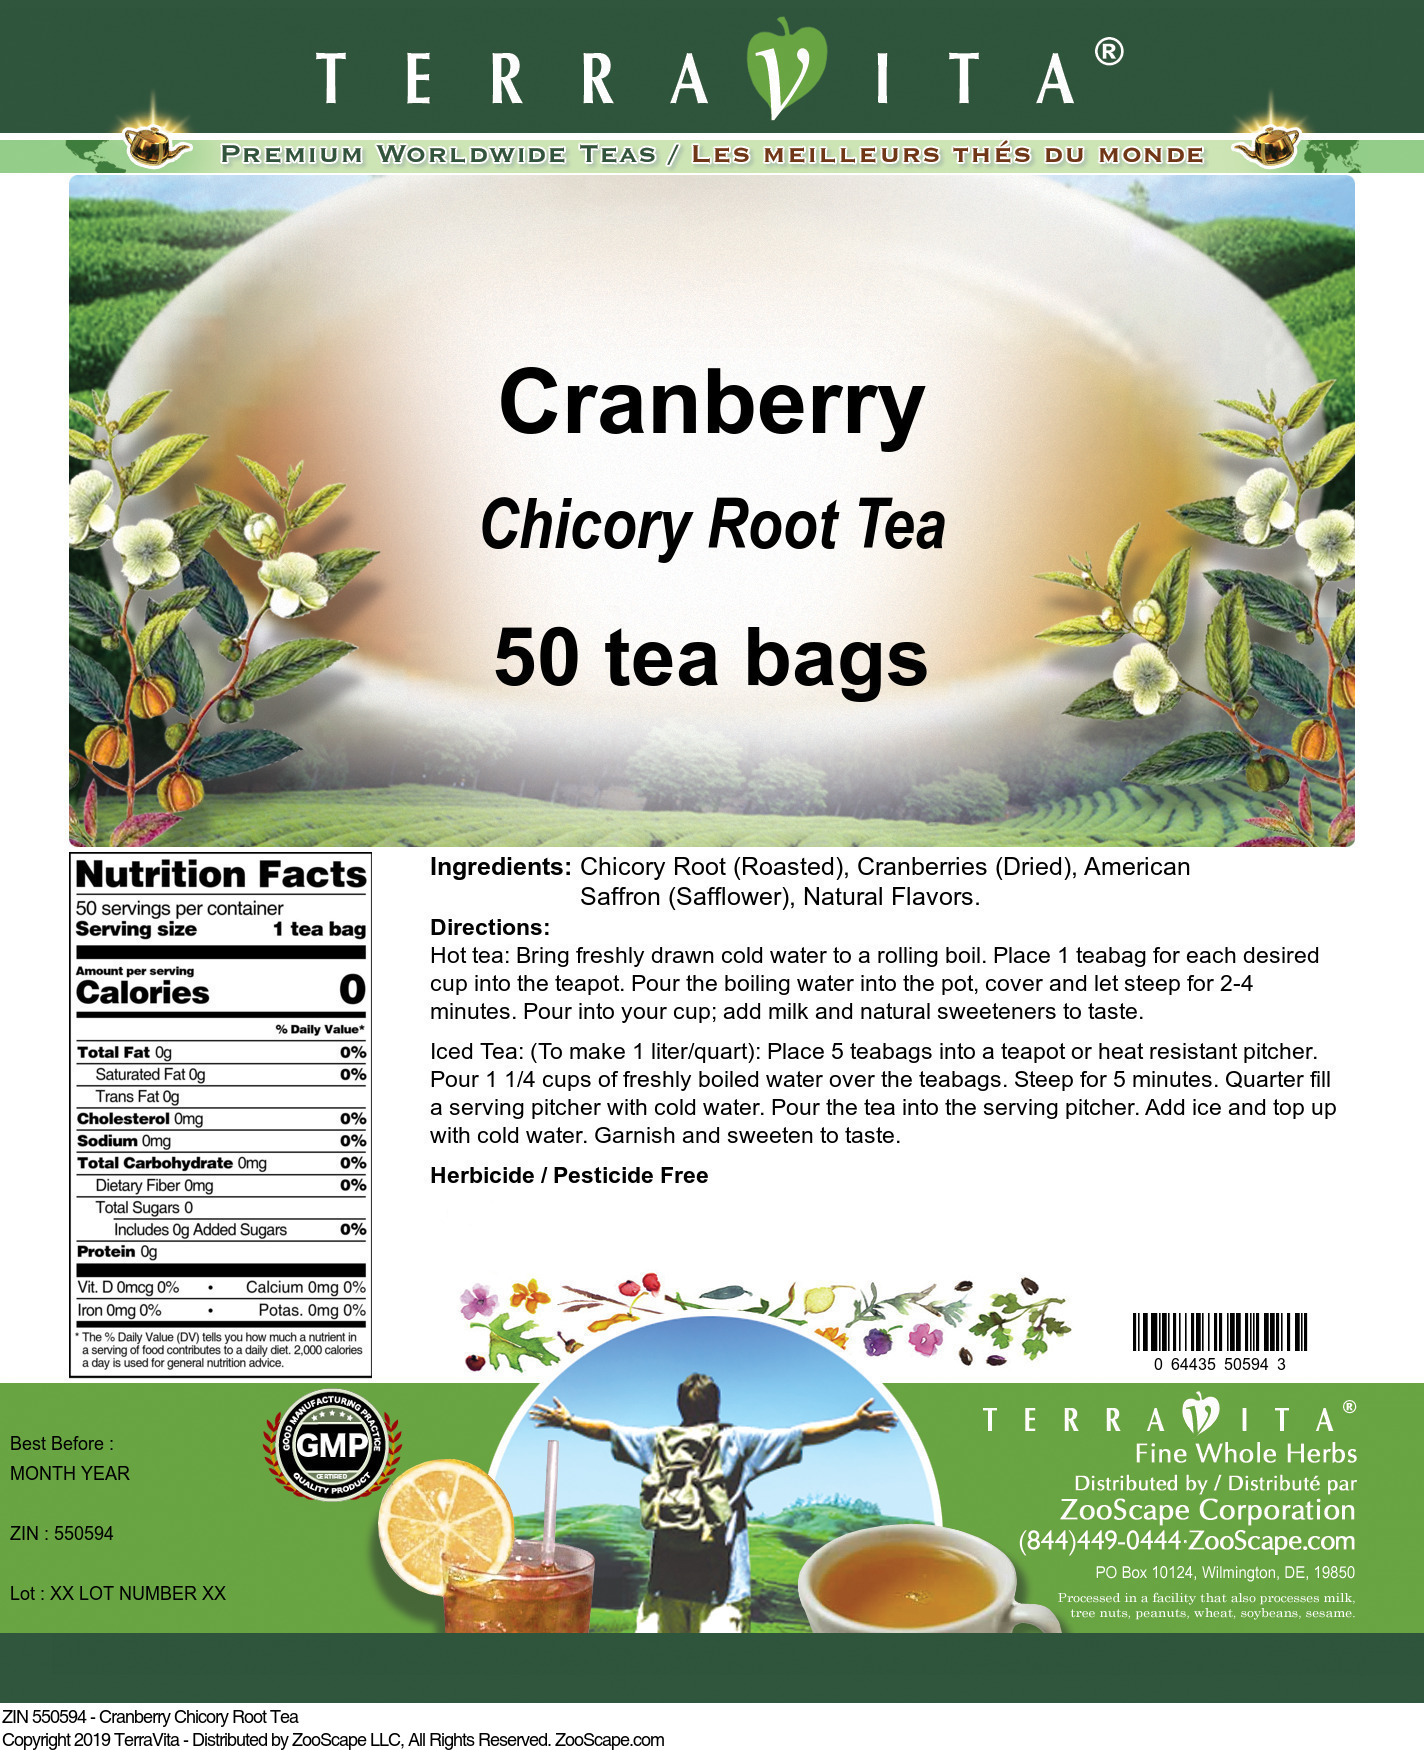 Cranberry Chicory Root Tea - Label